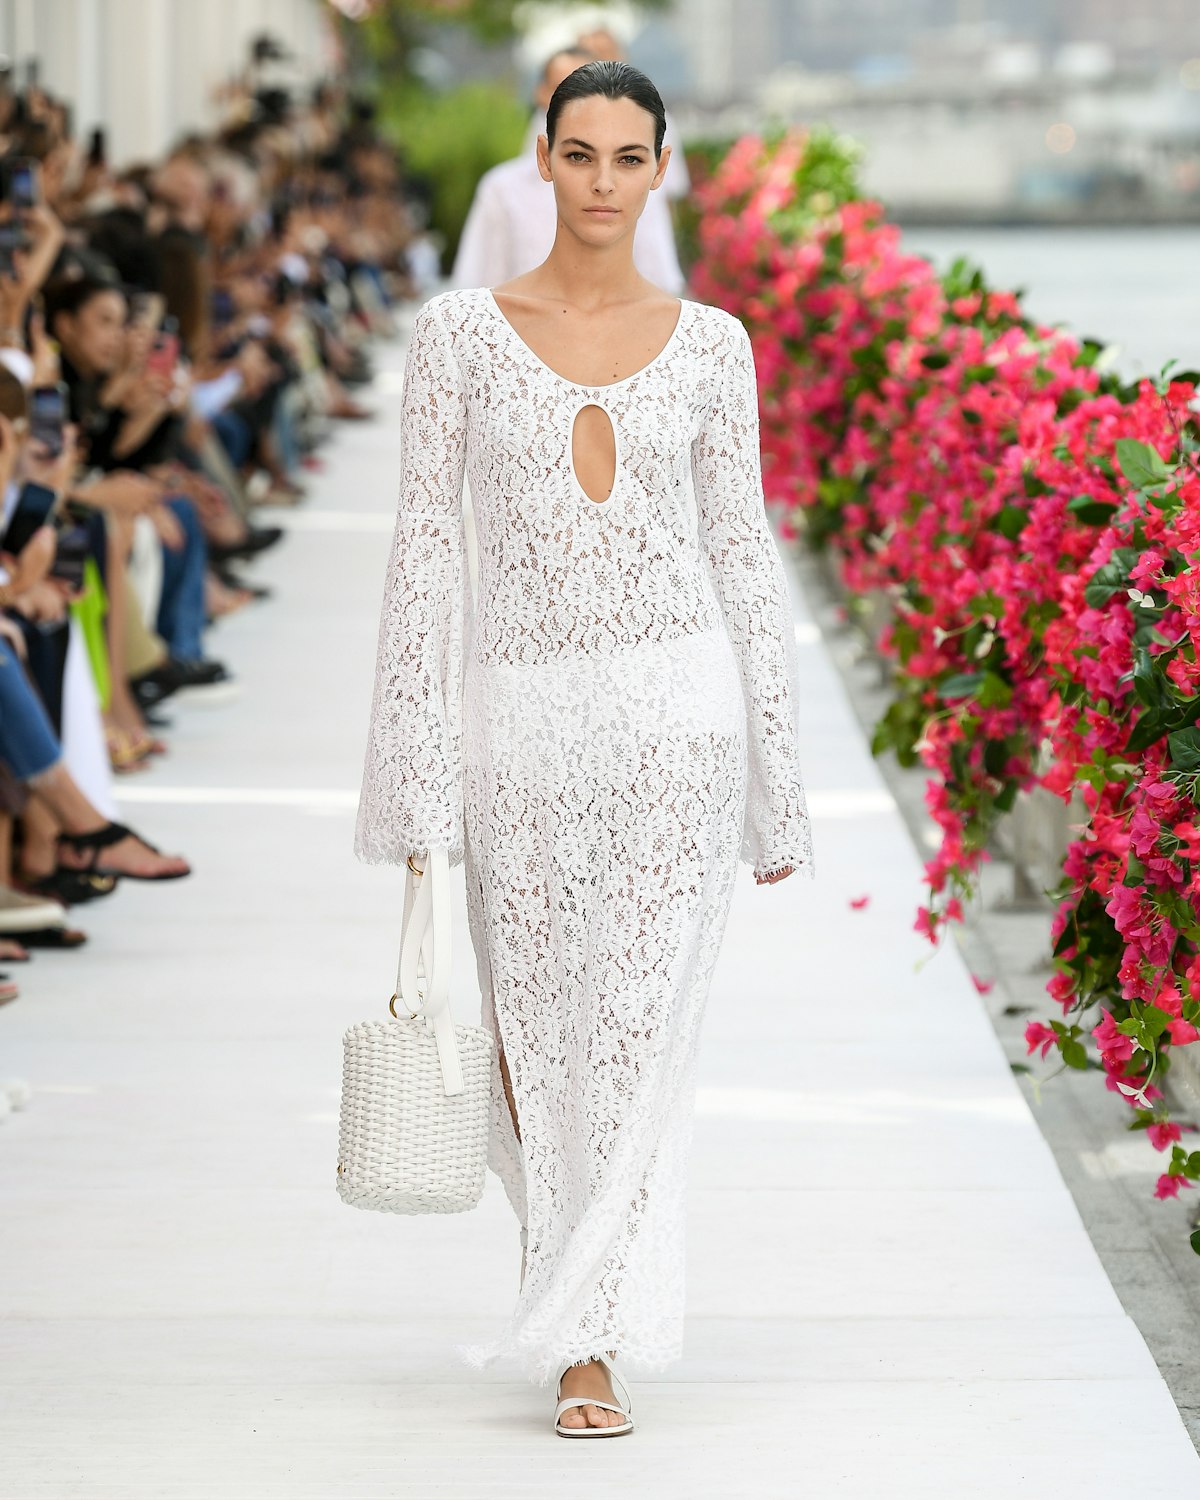 Michael Kors Spring/Summer 2024 Show Takes Us on a Romantic Getaway